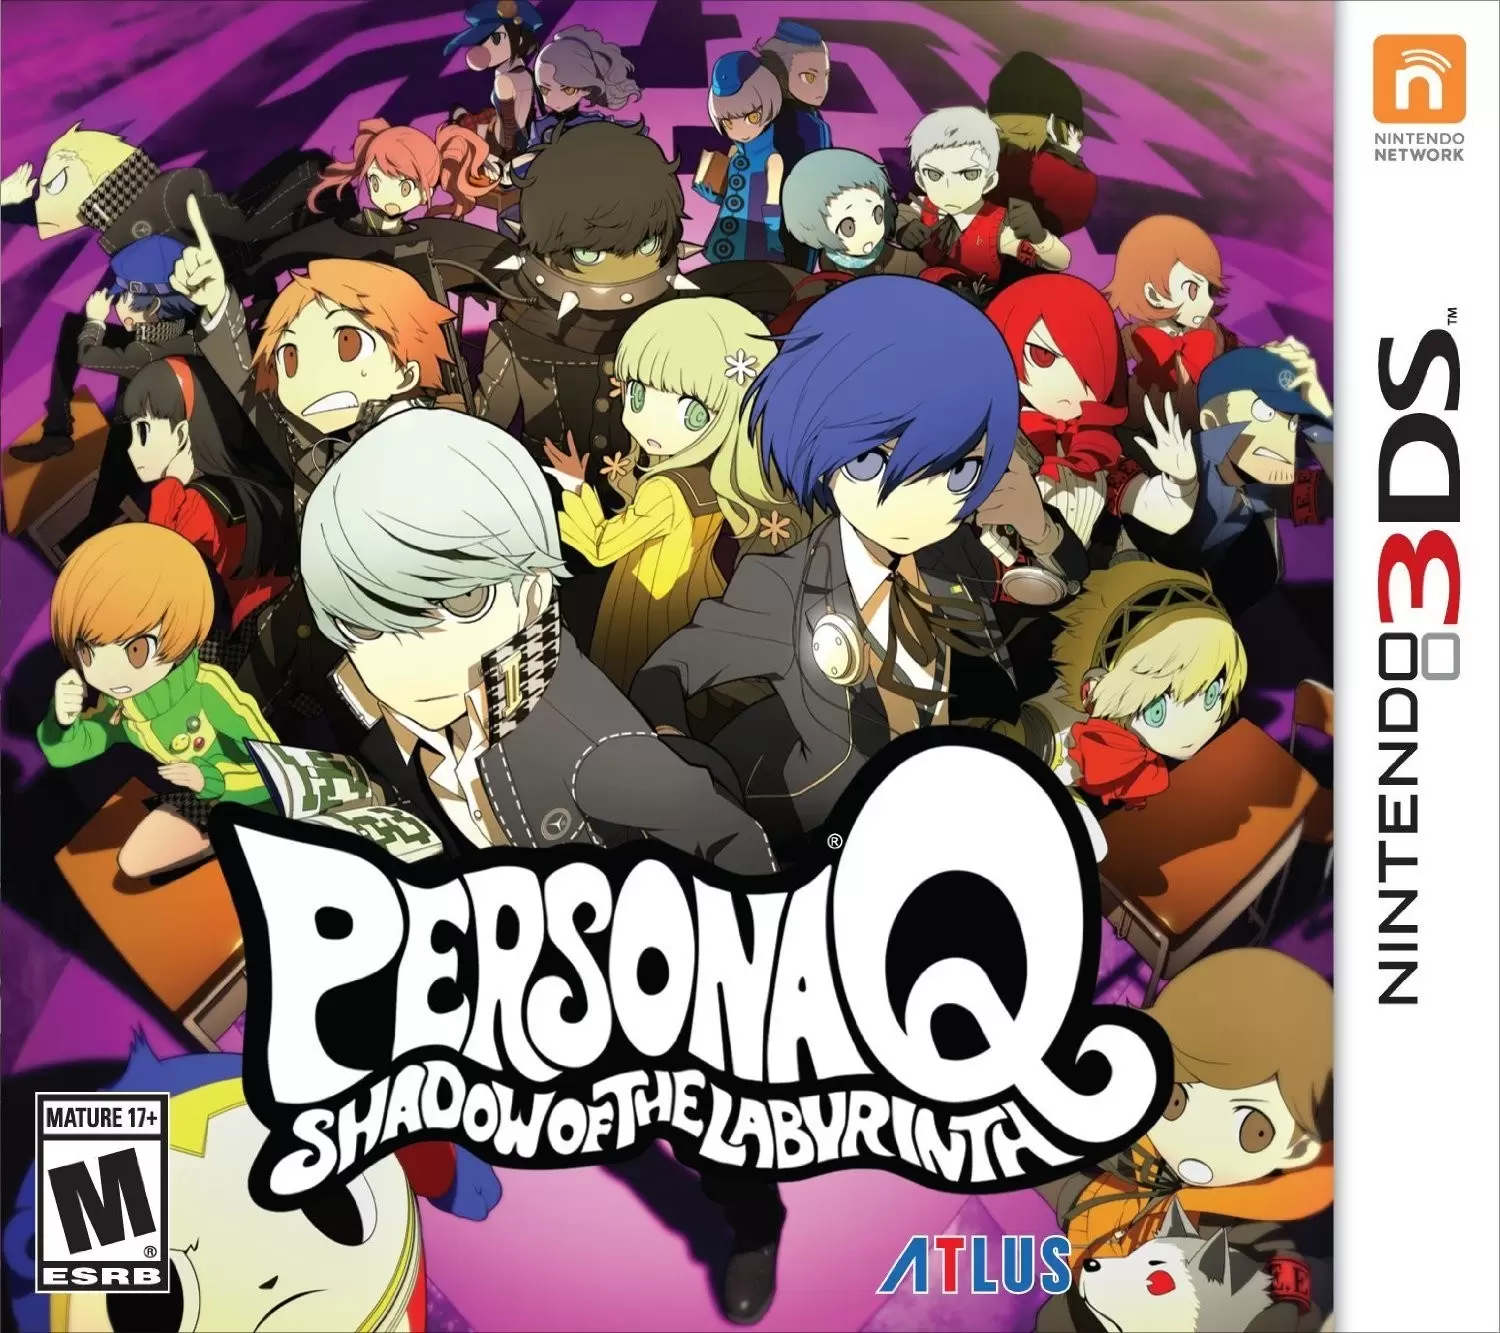 Jeux Nintendo 2DS / 3DS - Persona Q: Shadow of the Labyrinth